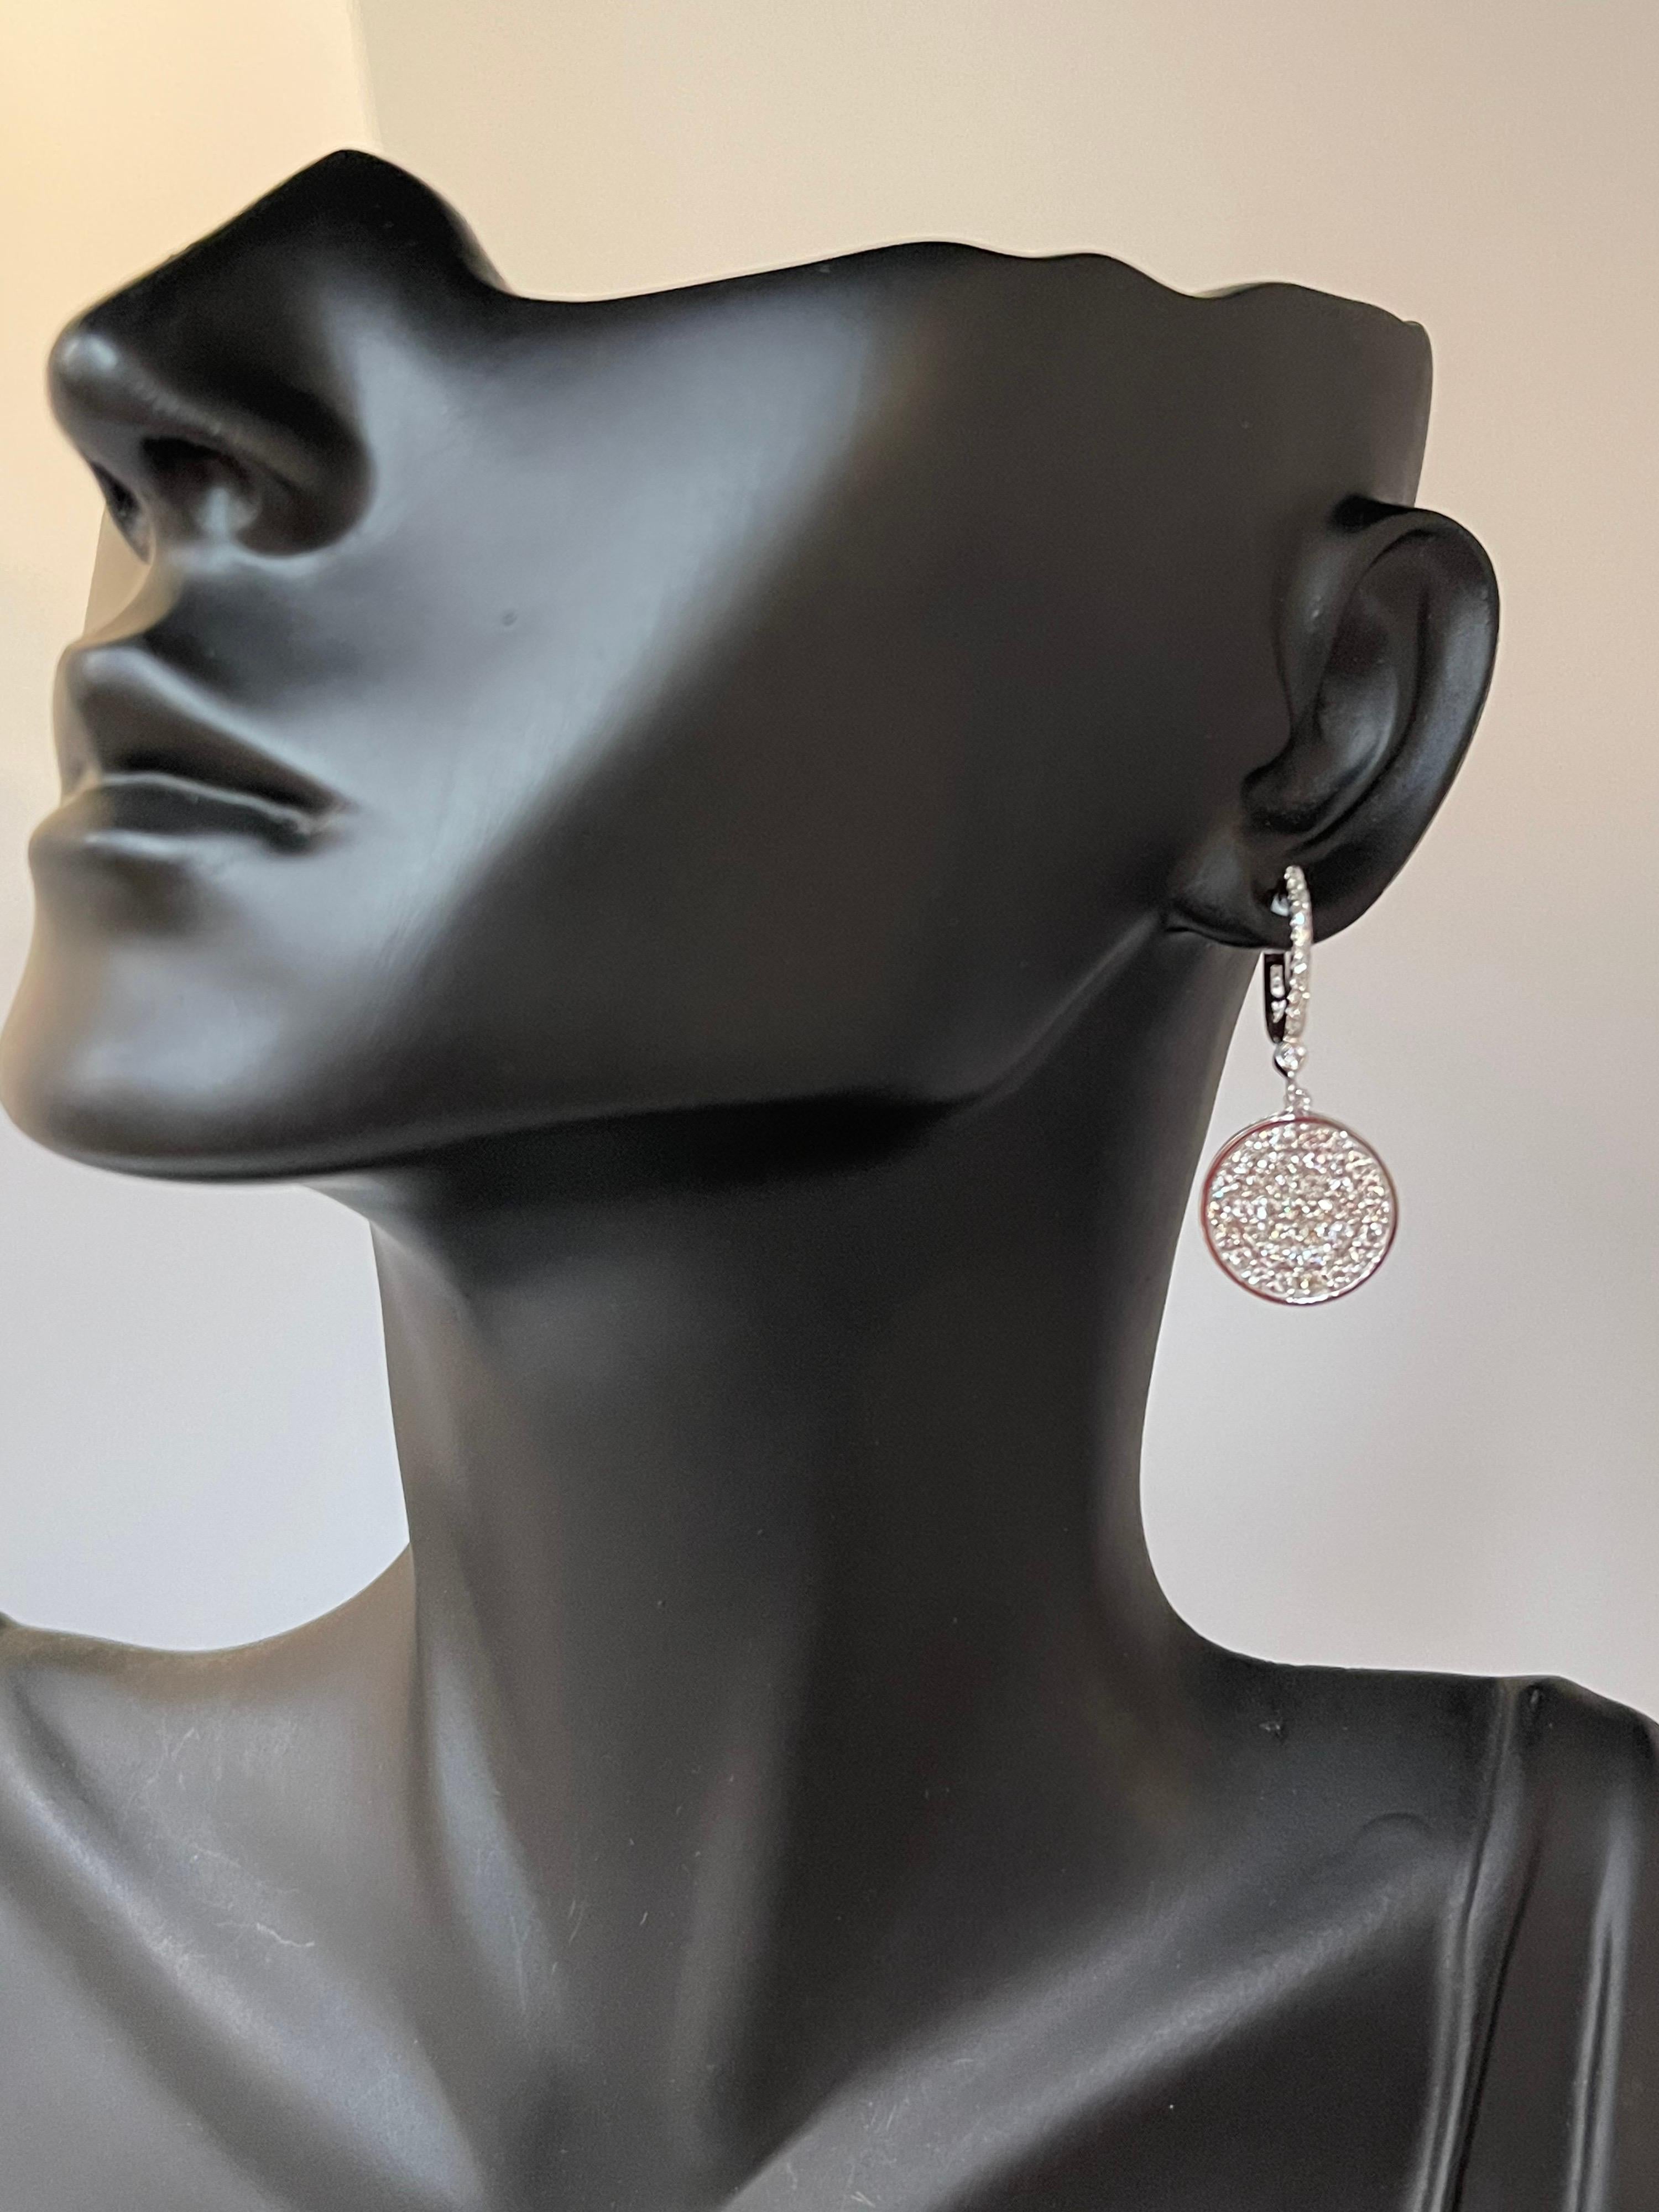 
Designer Effy's 1.58 Ct Natural Diamond Dangling Huggies Earrings 14K White Gold
Post Earrings with Small Huggies on the top . 
This exquisite pair of earrings are beautifully crafted with 14 karat White gold .
Weight of 14 K gold 6.8 grams
I did